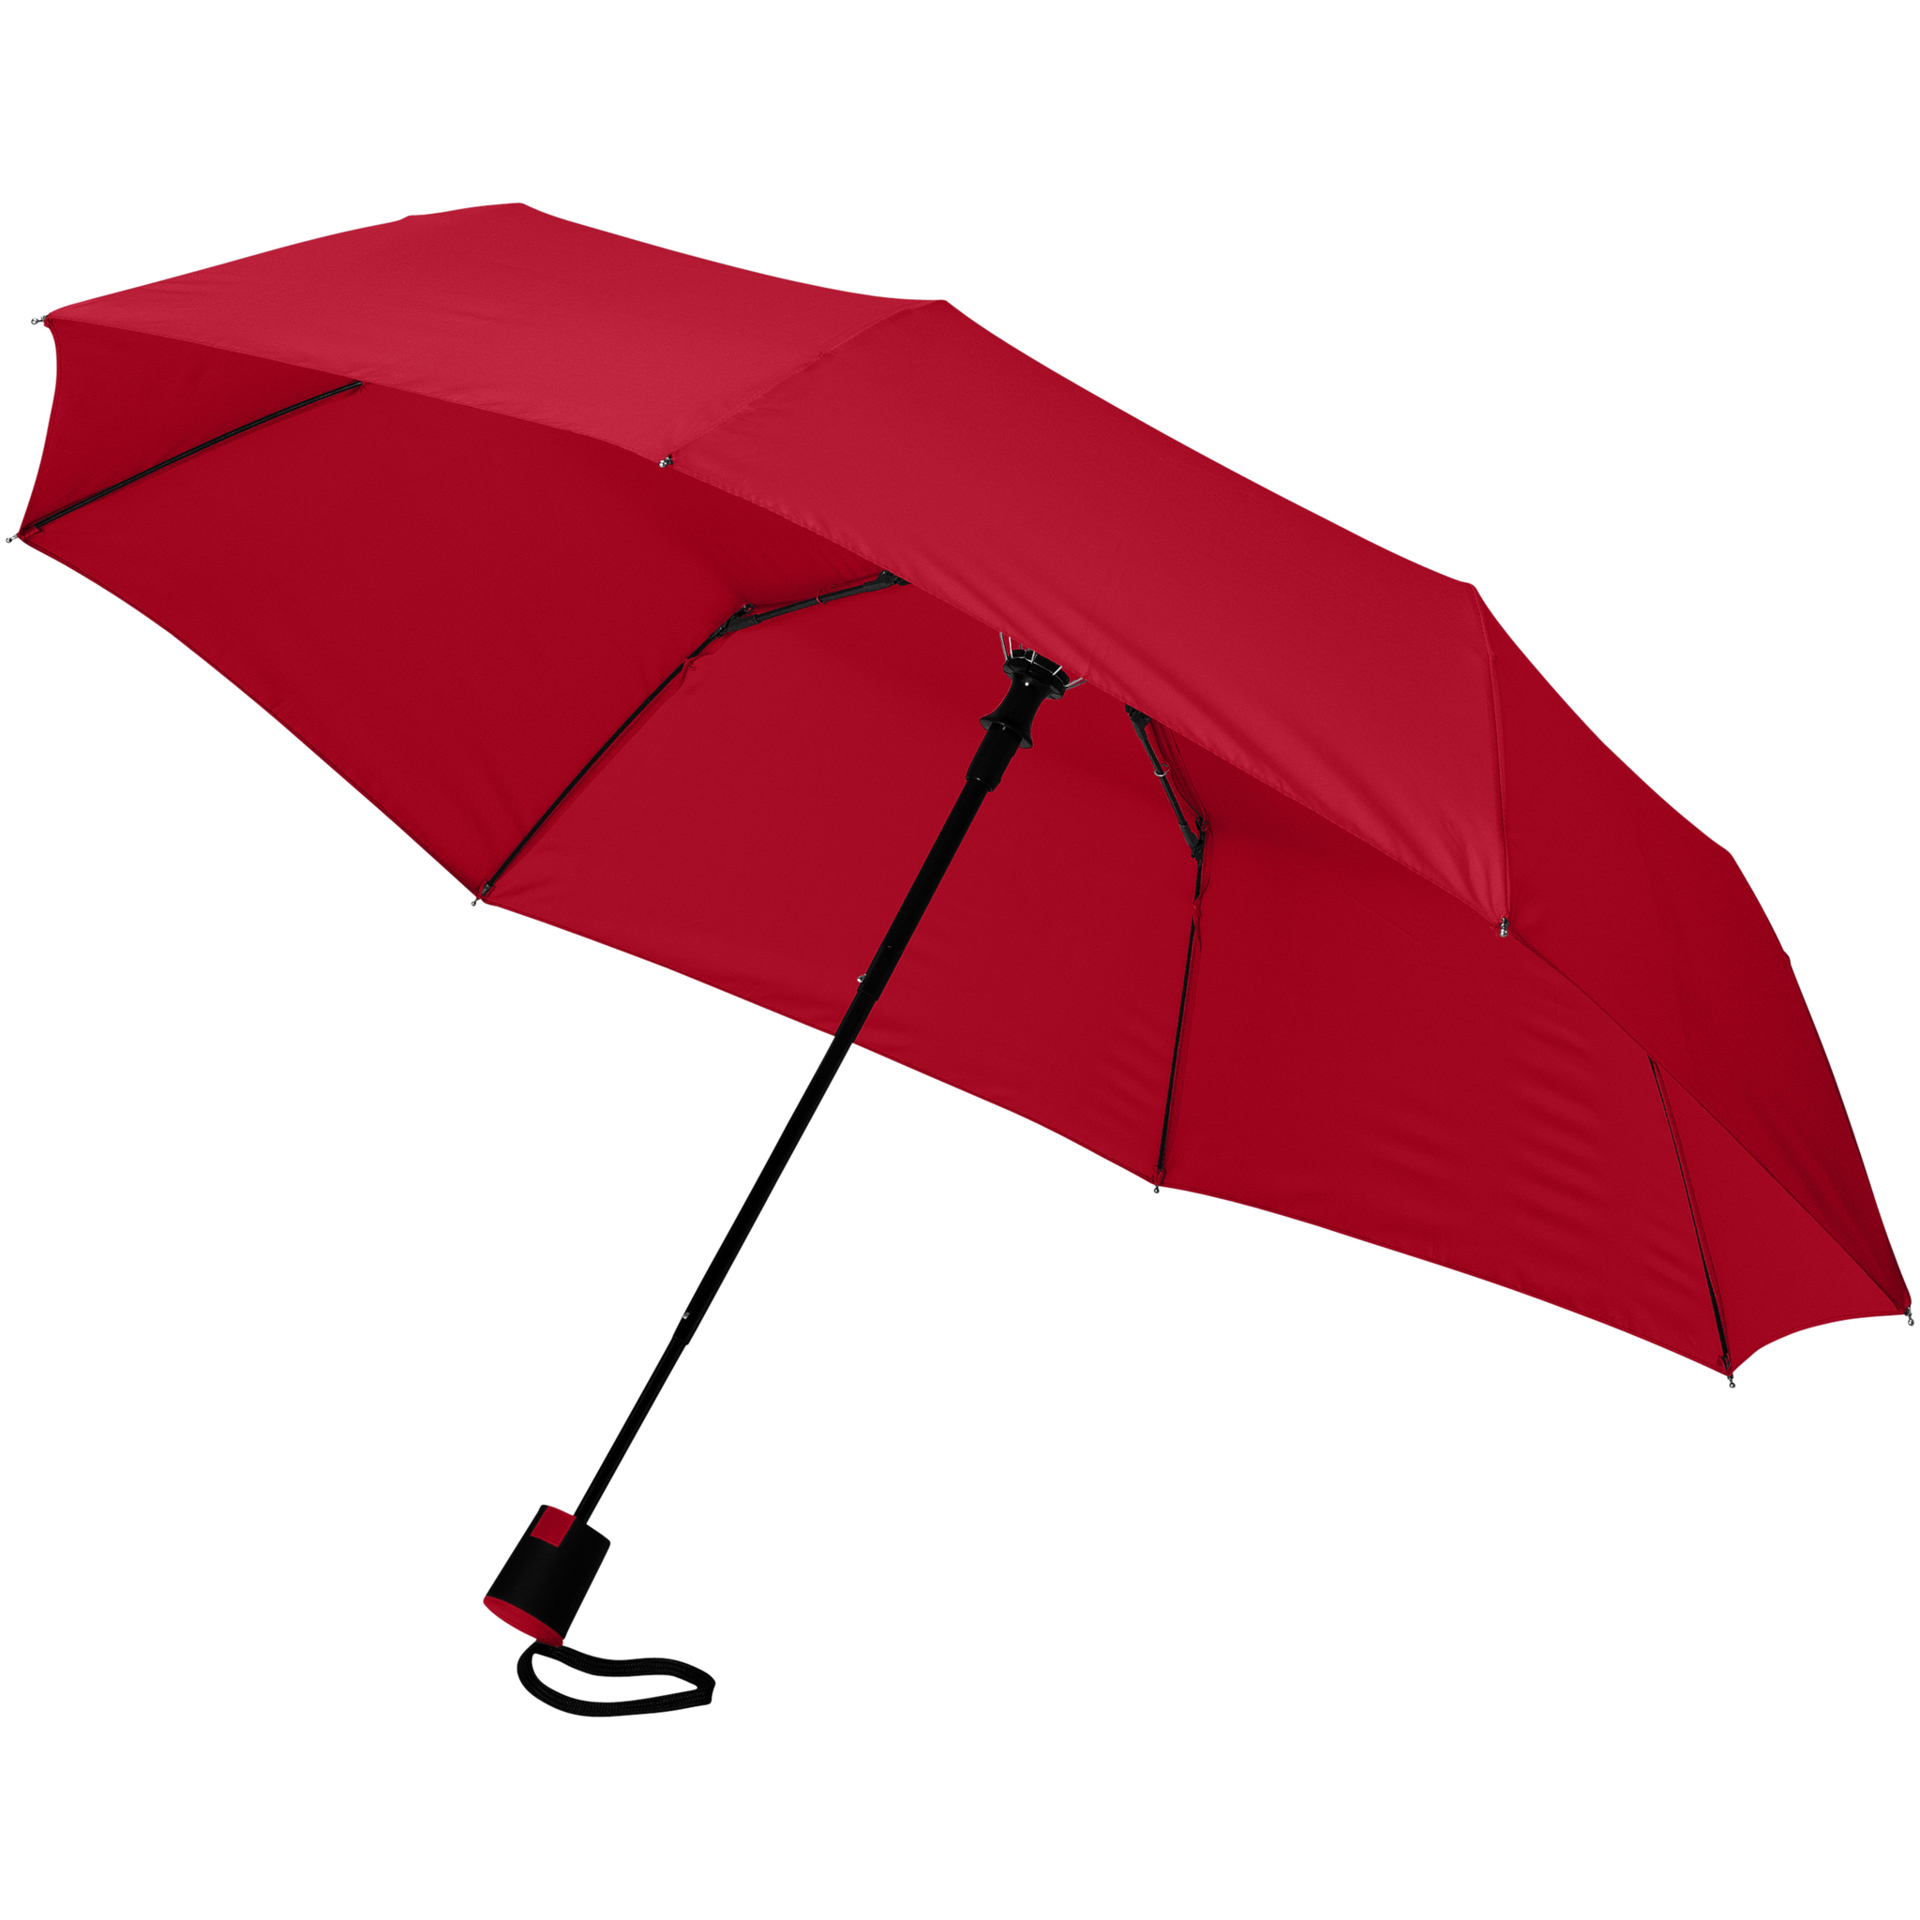 3 Section Auto Open Umbrella in red